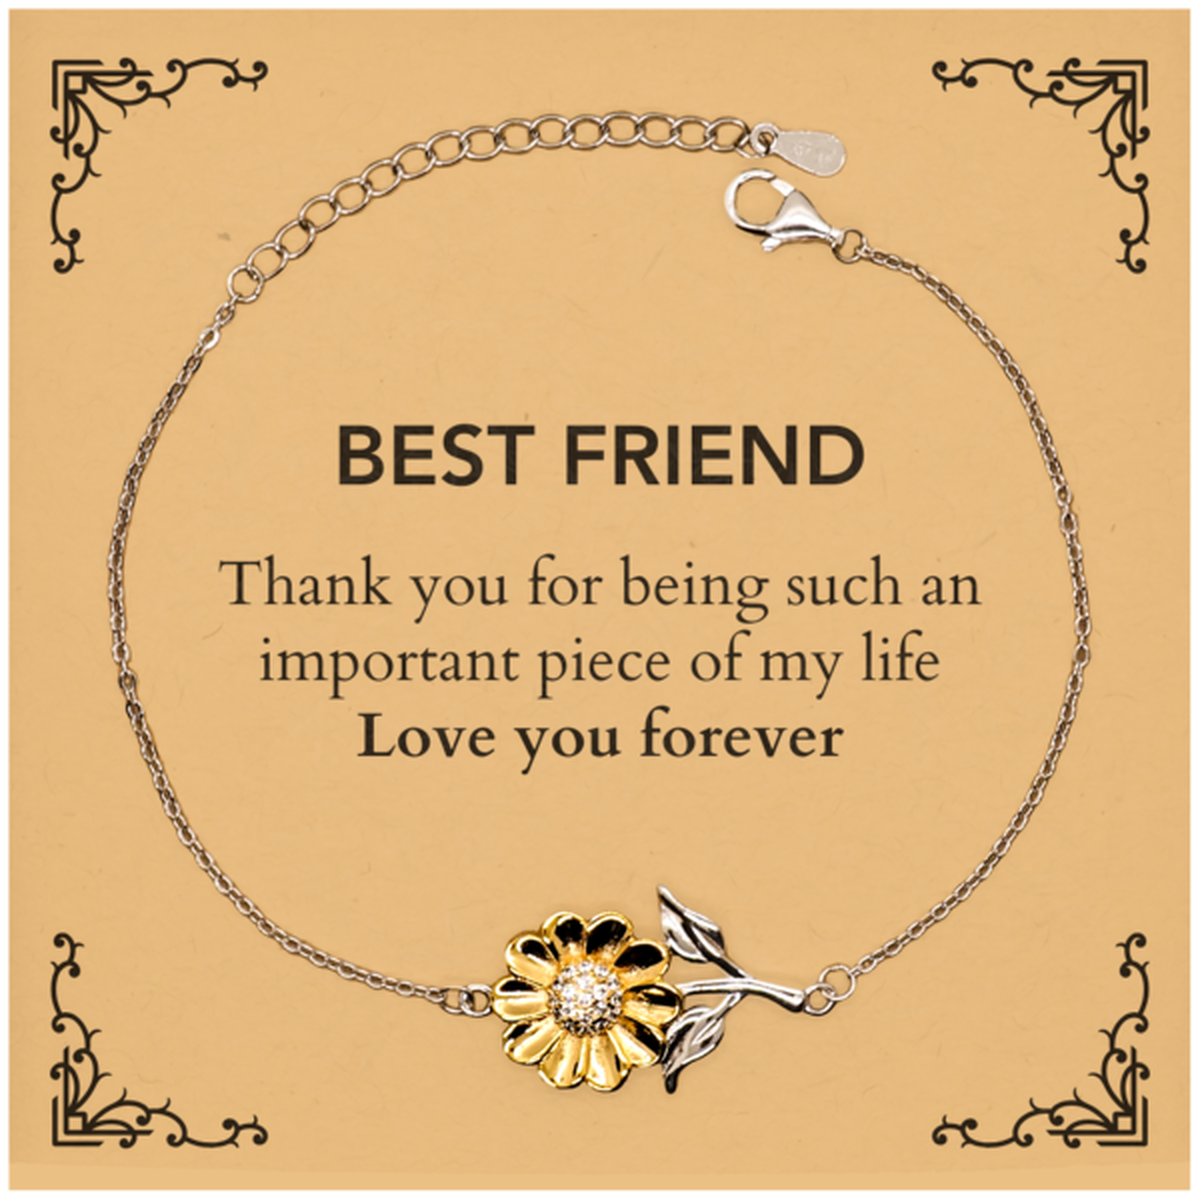 Appropriate Best Friend Sunflower Bracelet Epic Birthday Gifts for Best Friend Thank you for being such an important piece of my life Best Friend Christmas Mothers Fathers Day